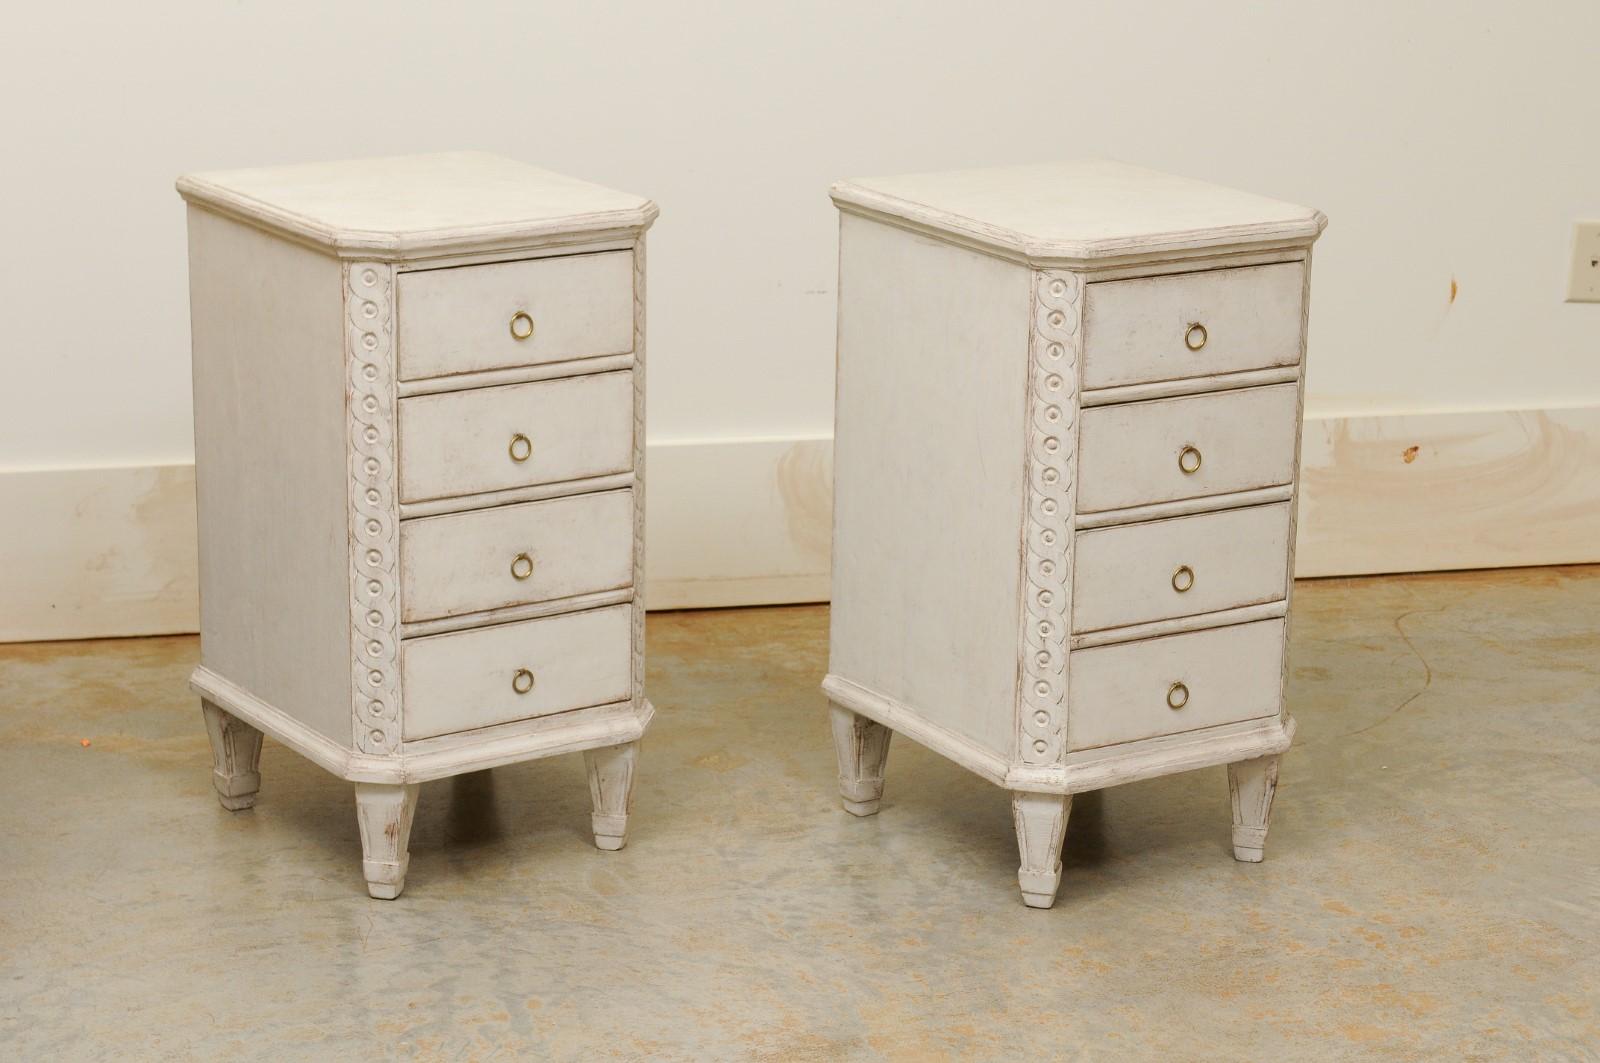 Pair of Swedish Neoclassical Style Painted Nightstand Tables with Guilloches 1